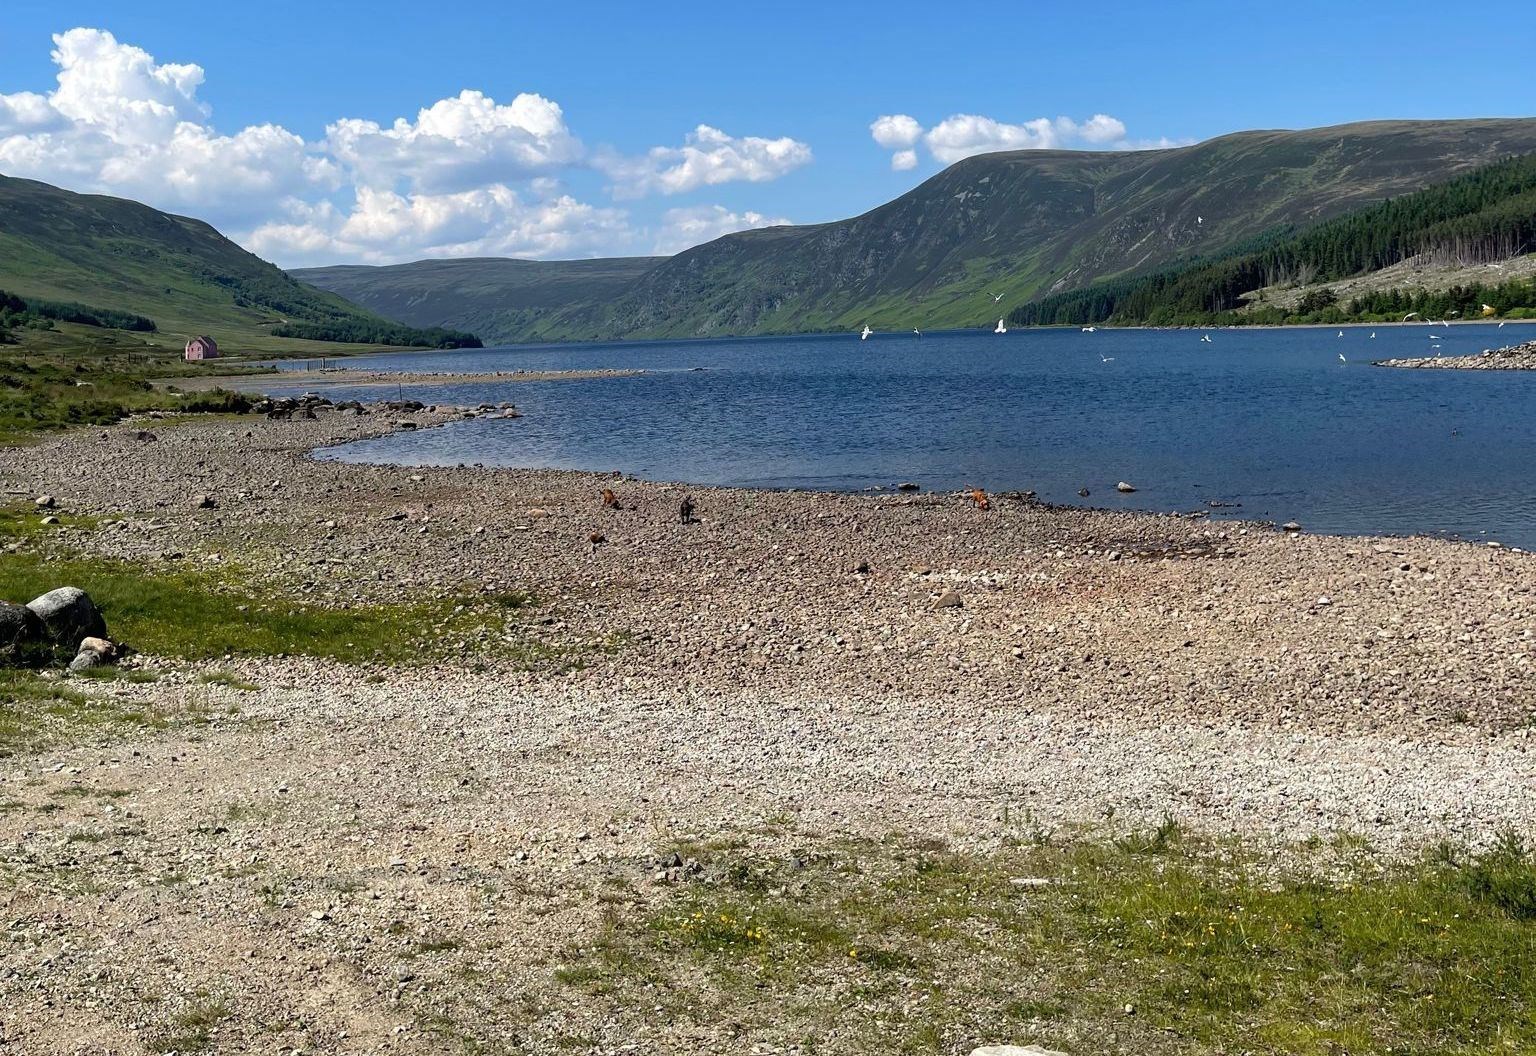 Easter Ross dog walker’s before and after pictures reveal extent of water drop at beautiful Loch Glass